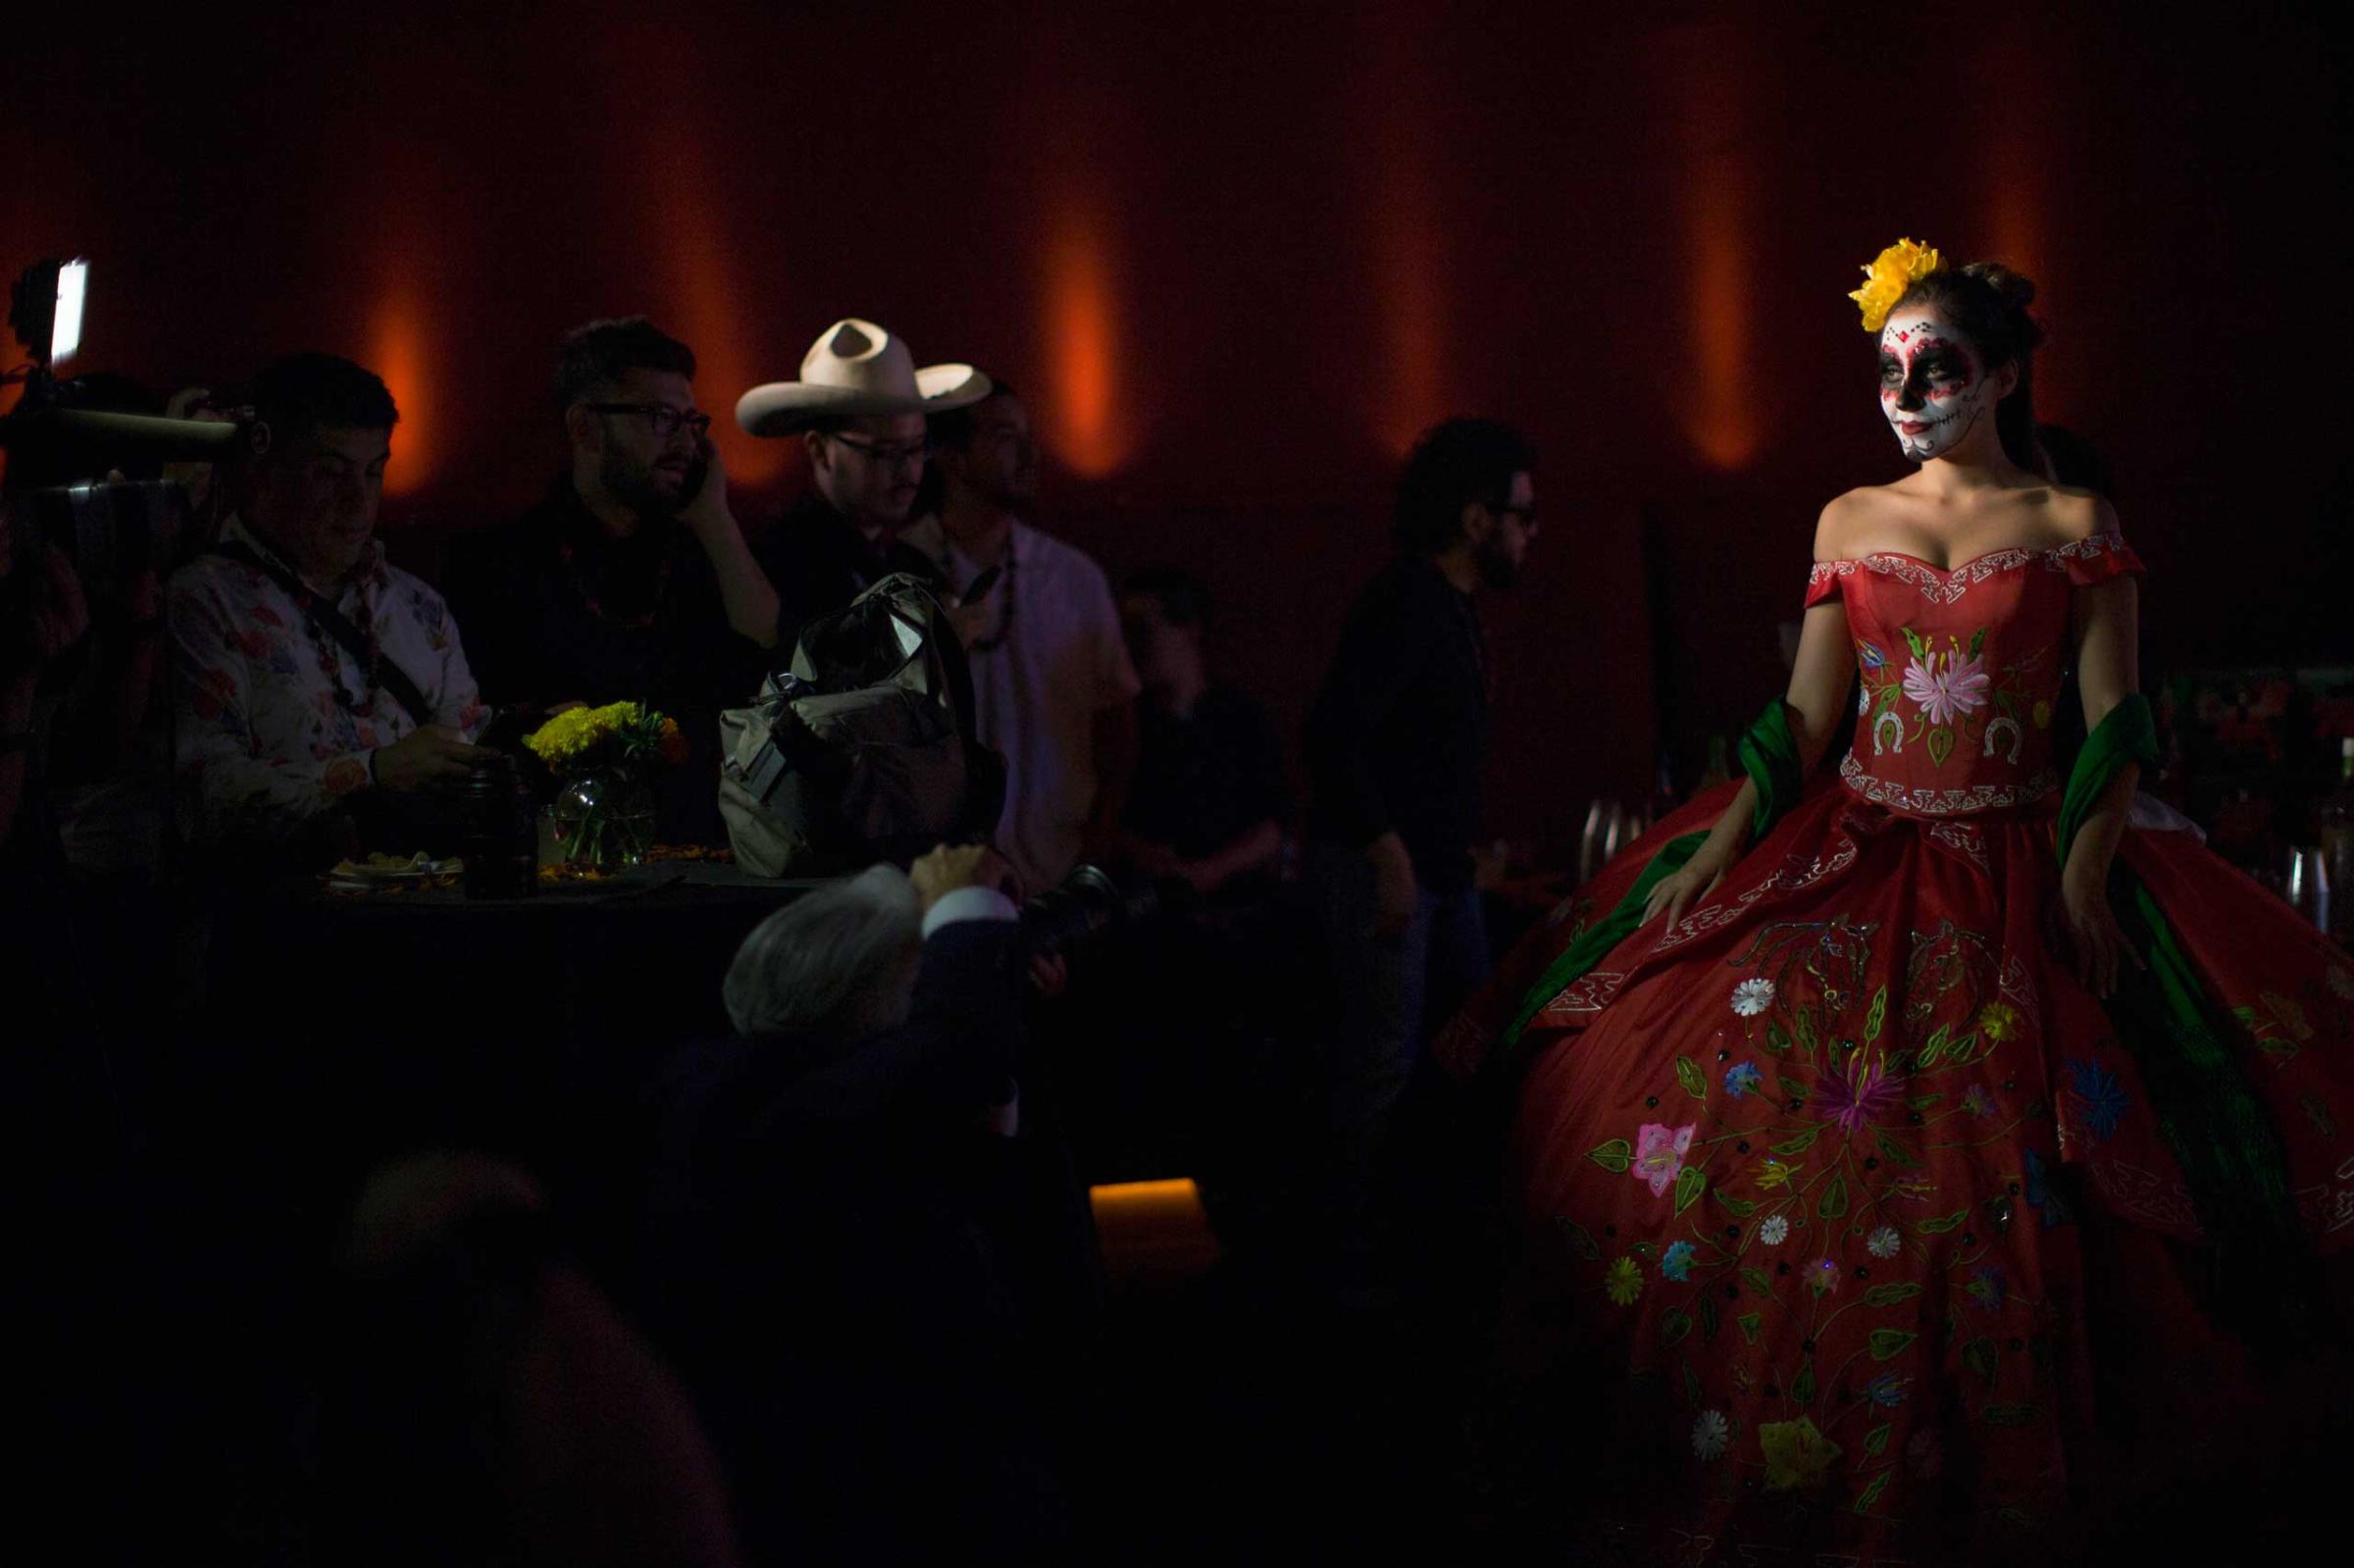 A model is pictured during a Quinceanera Magazine Catrina fashion show at a press reception ahead of the 15th annual Dia de los Muertos, or Day of the Dead, festival at Hollywood Forever Cemetery in Los Angeles